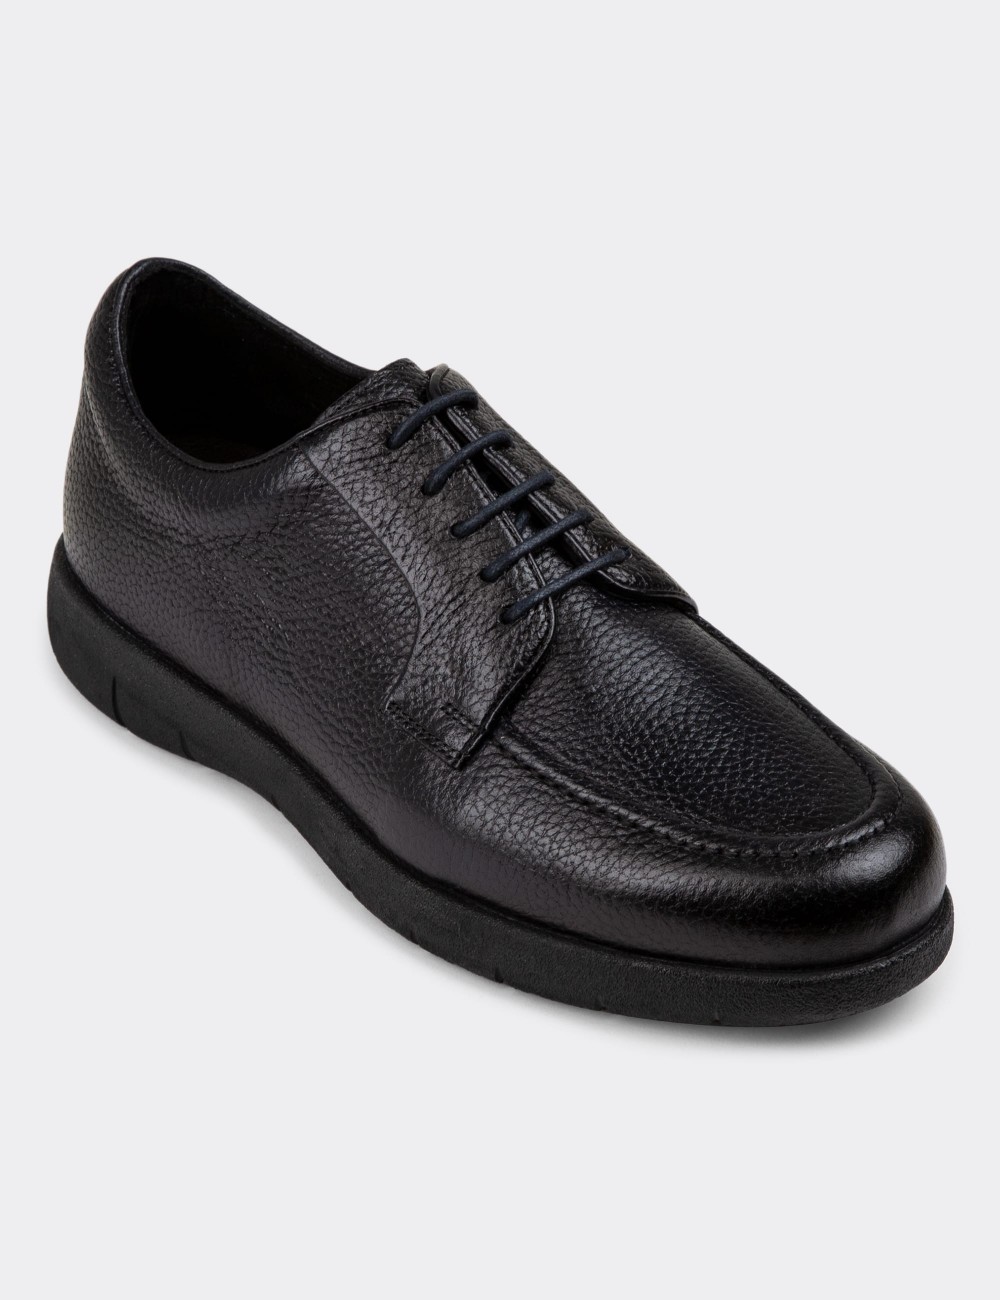 Navy Leather Lace-up Shoes - 01930MLCVC01